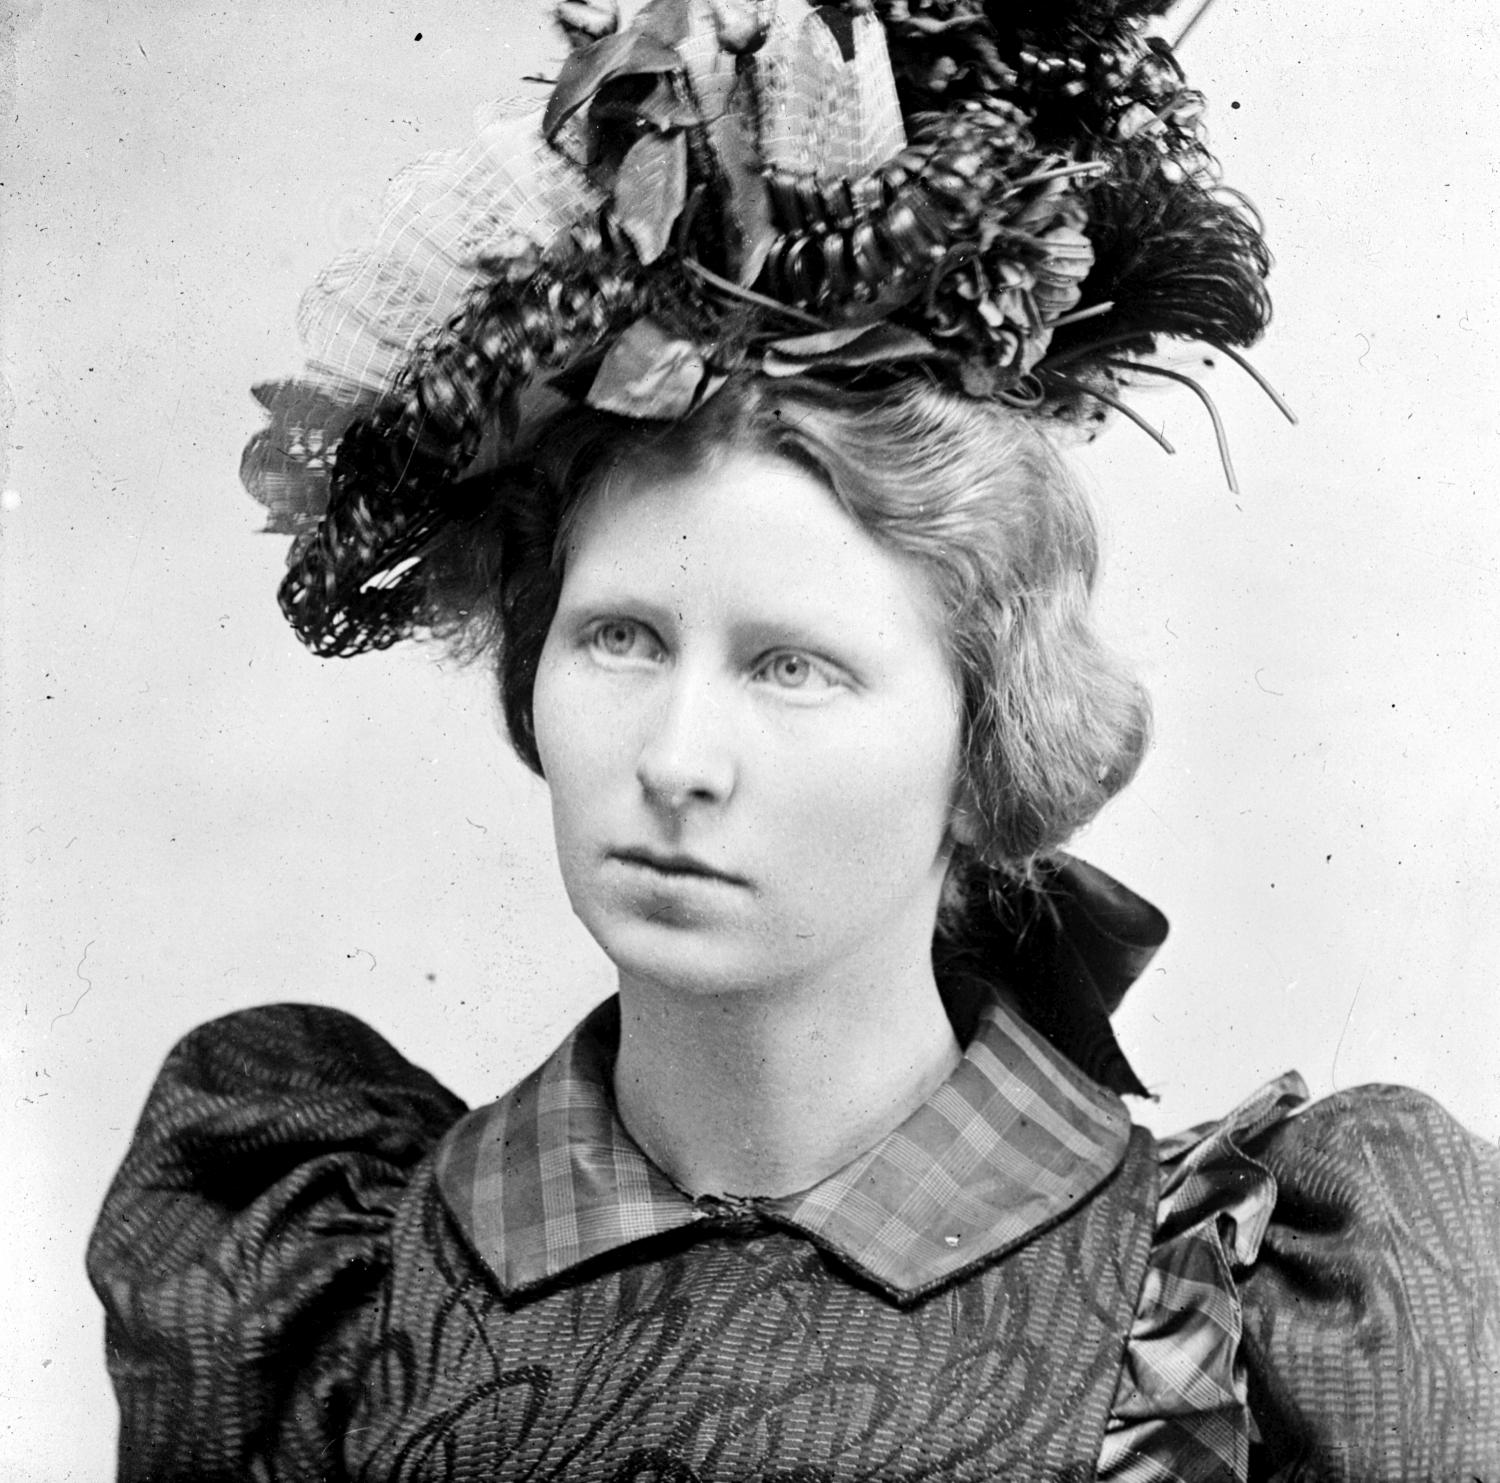 One of Mrs. Maynard's Victoria Police Department photos; Belle Adams, charged with the murder of Charles Kincaid; received five years for manslaughter.